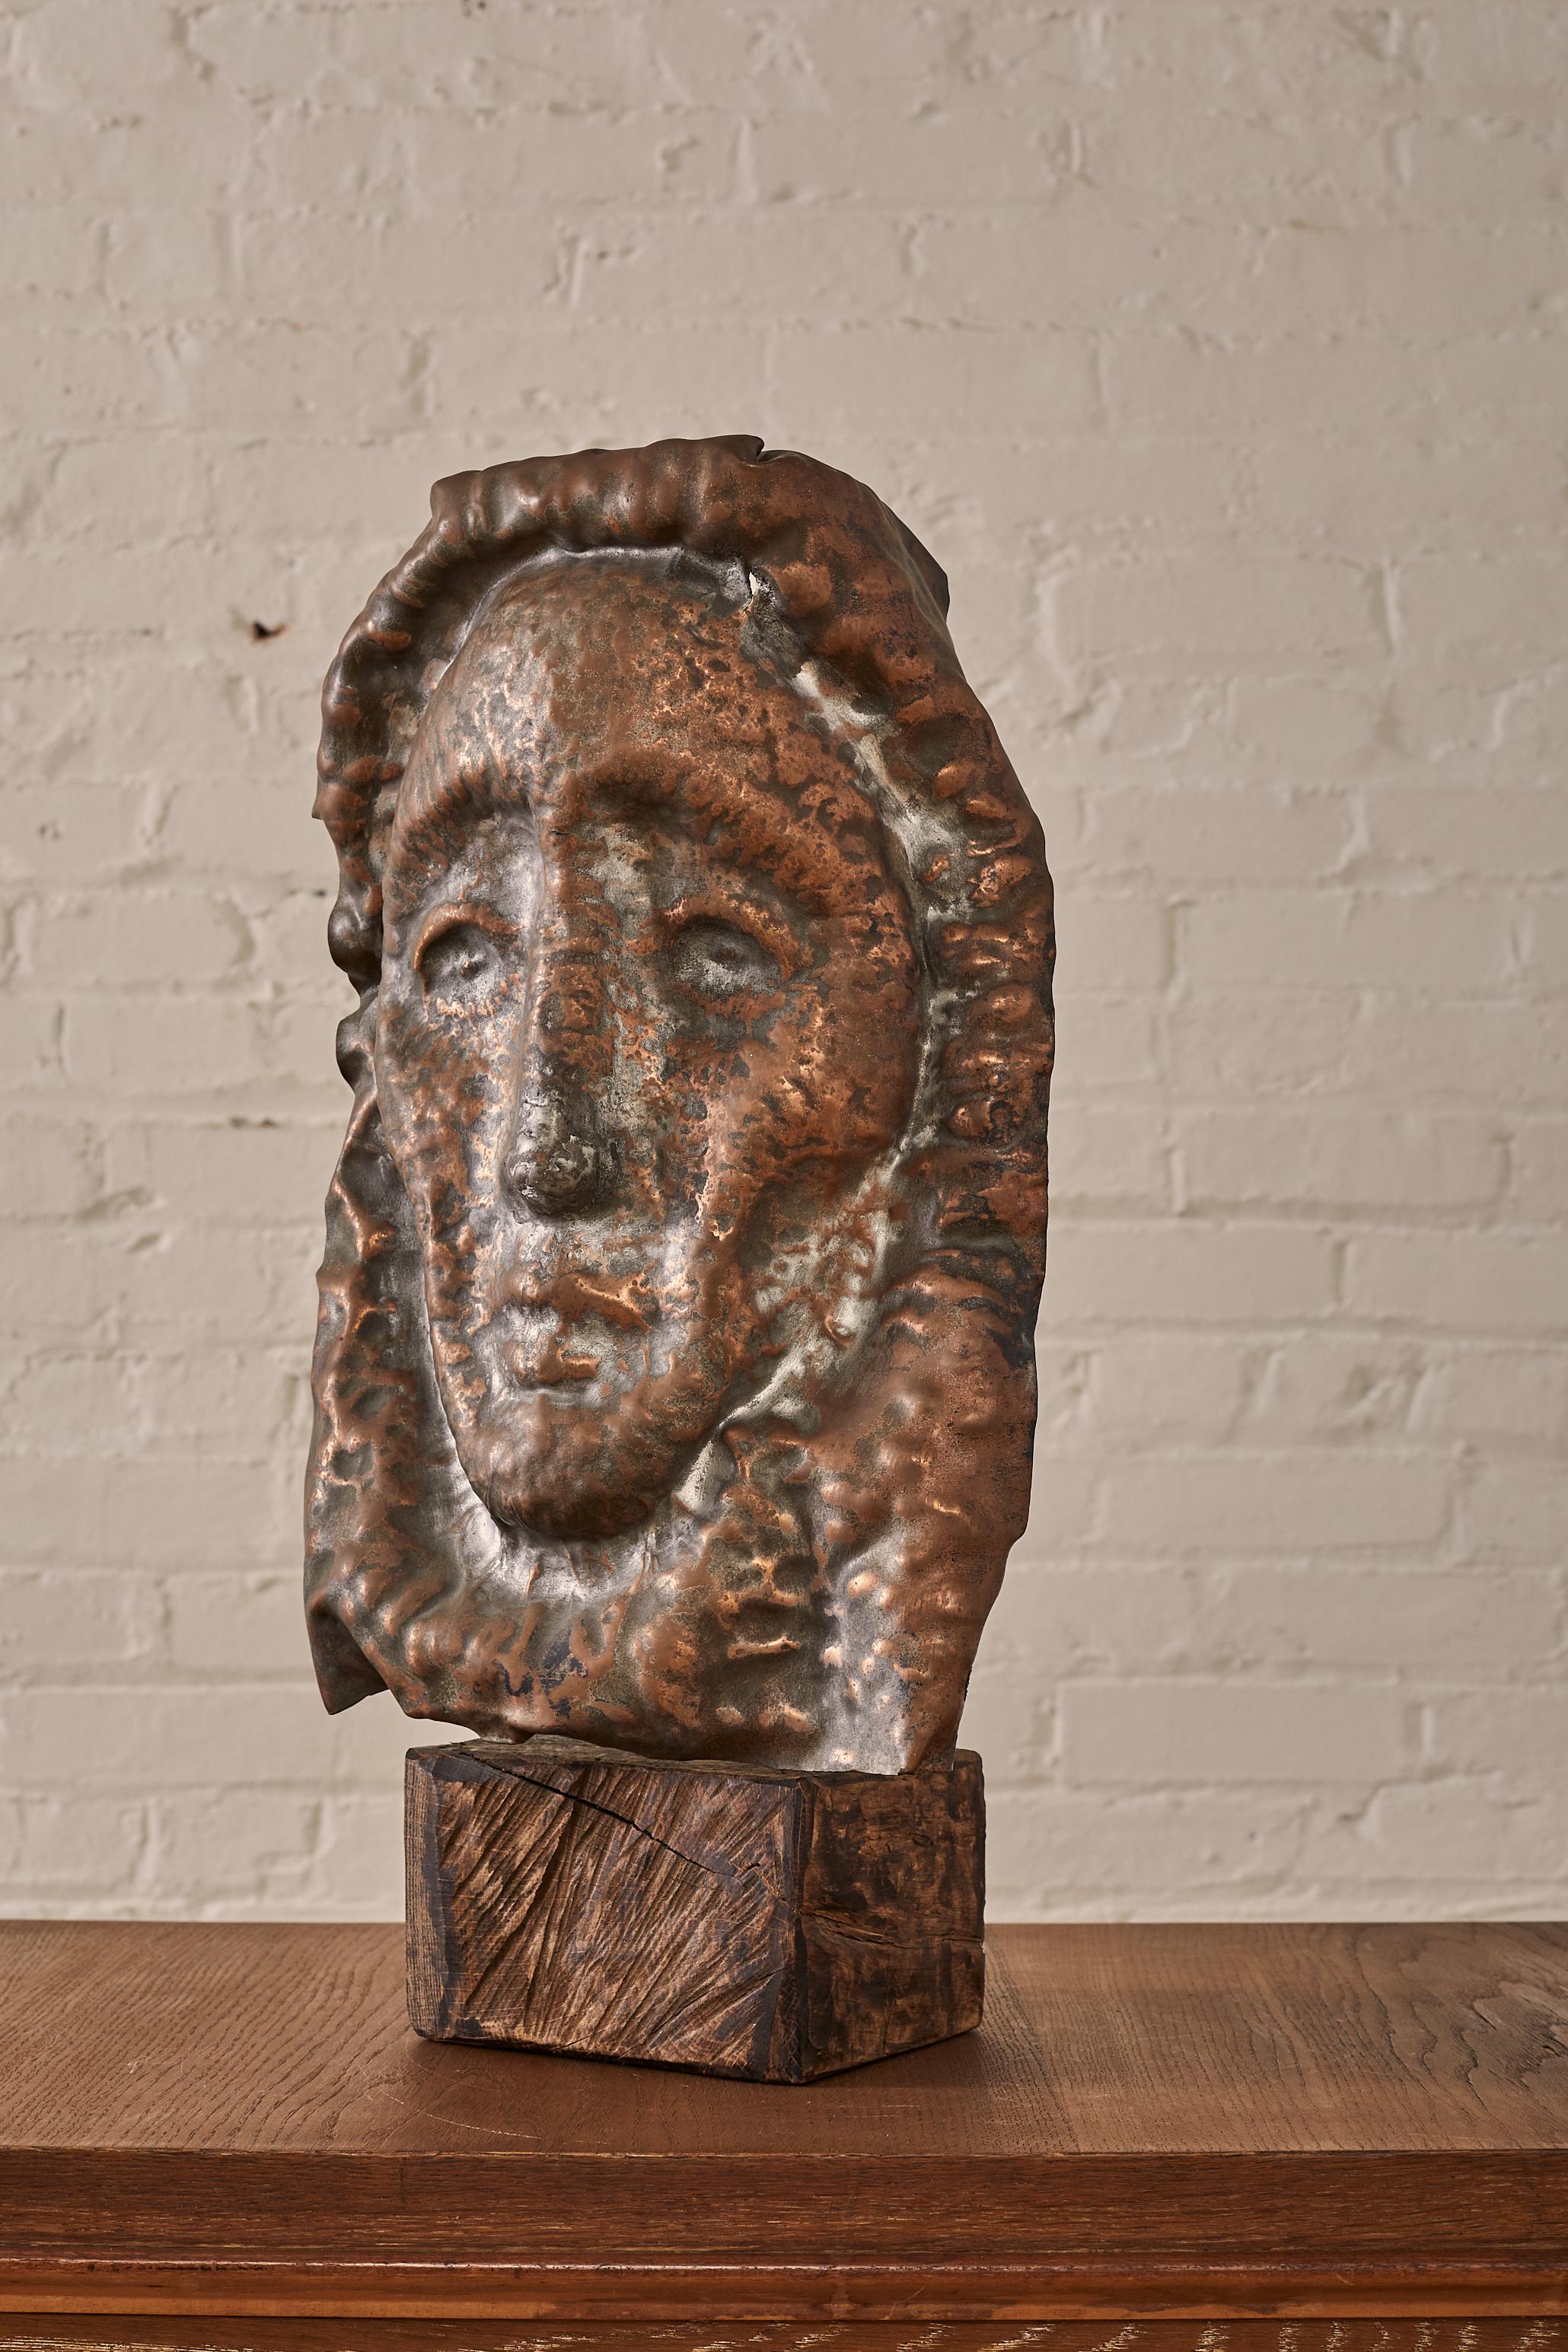 Hammered and Patinated Sculpture by Waylande Gregory on a raw wooden base.

